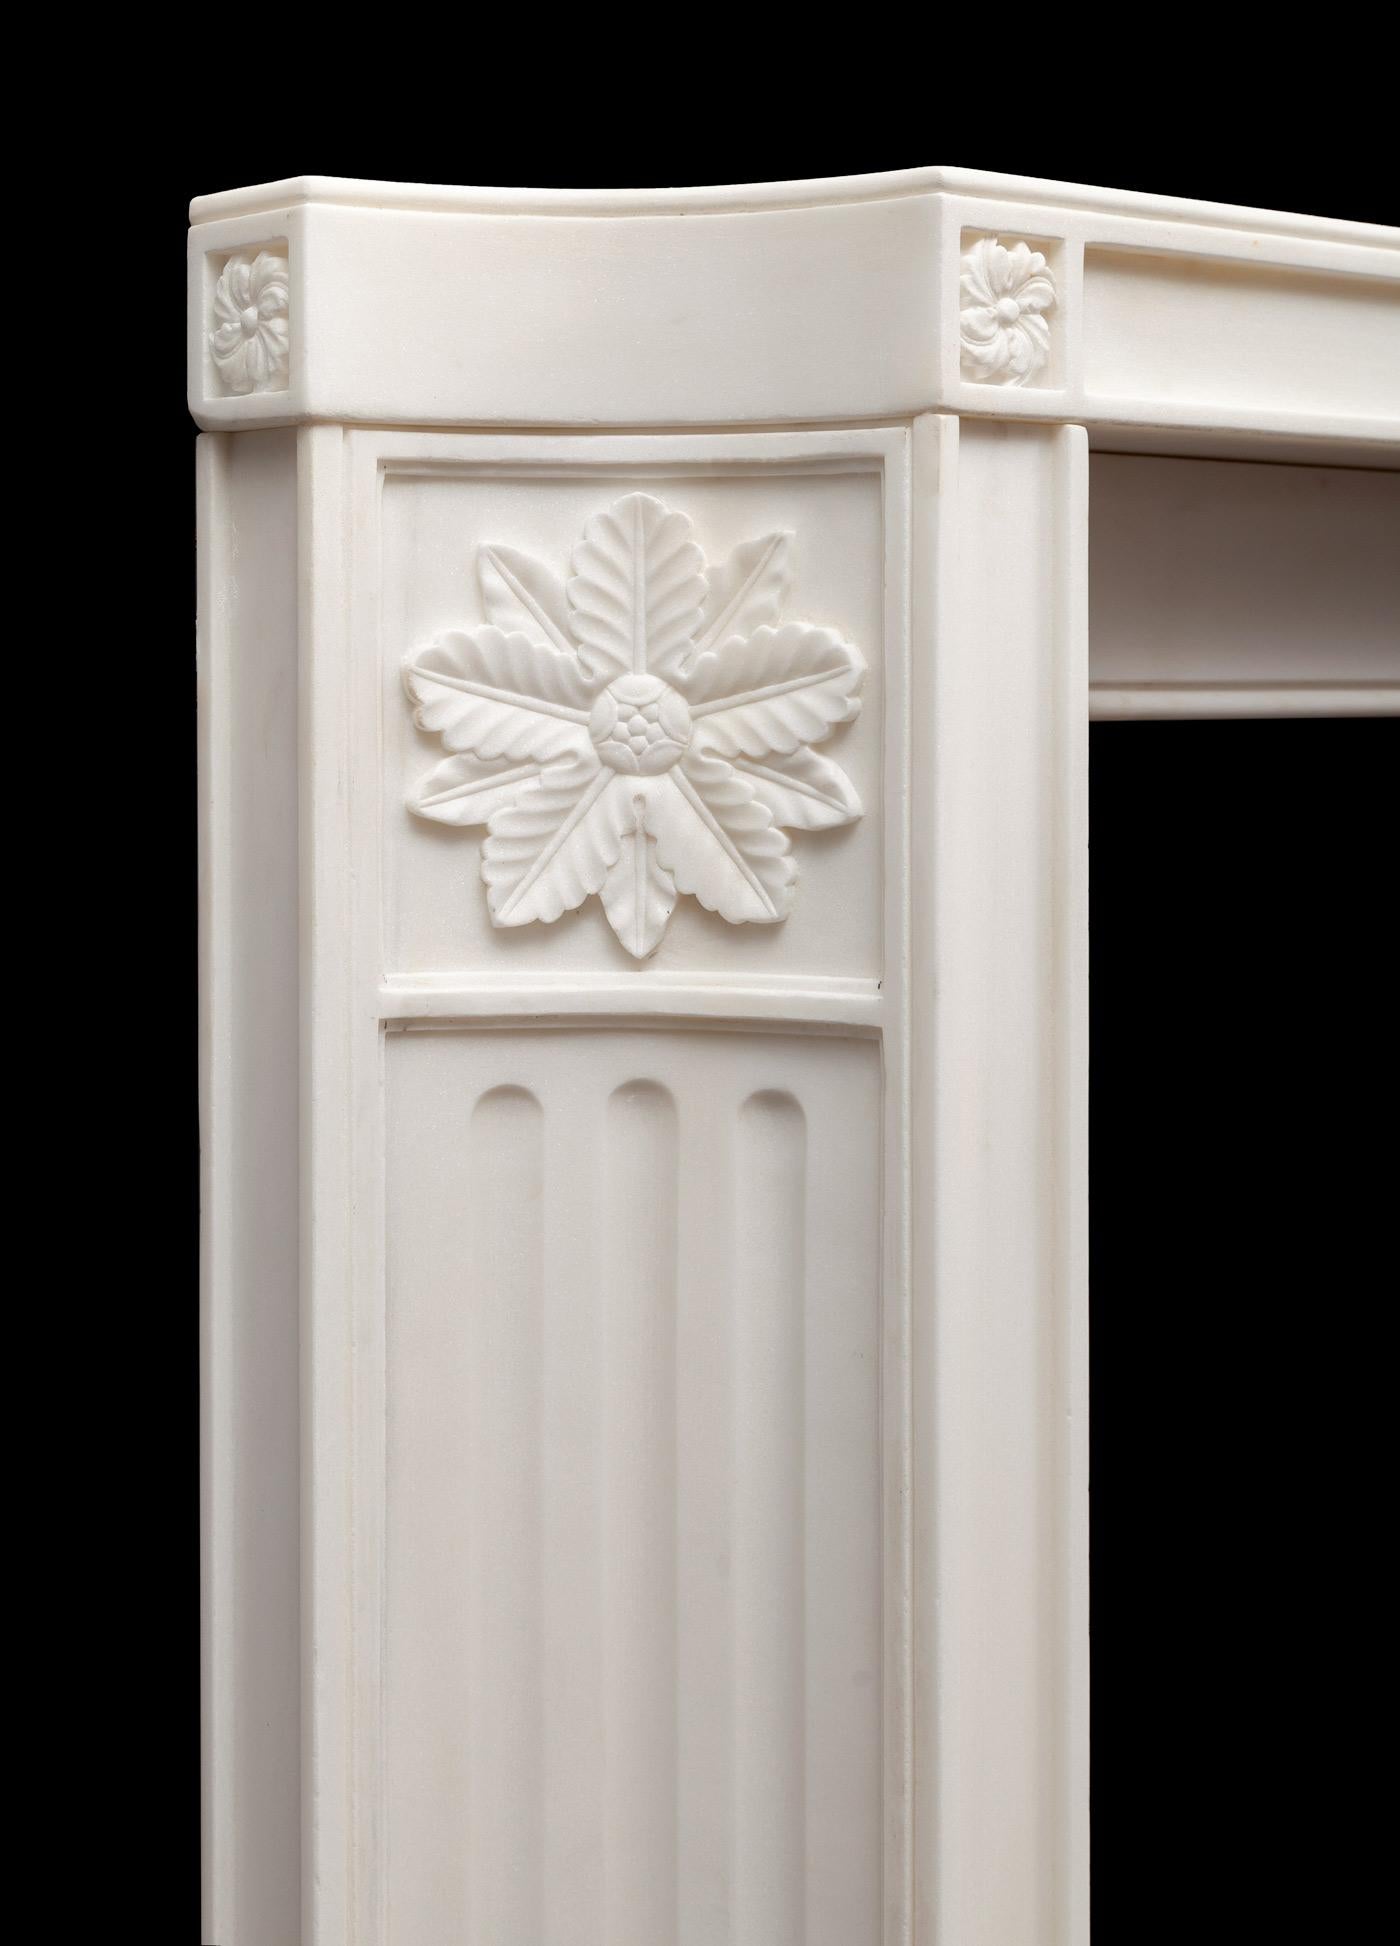 A very stylish hand carved white marble fireplace, worked from solid blocks of marble and presented with a matte finish. Inspired by the pared back classical revival taste of the early 20th century.
Equally at home in a period or contemporary